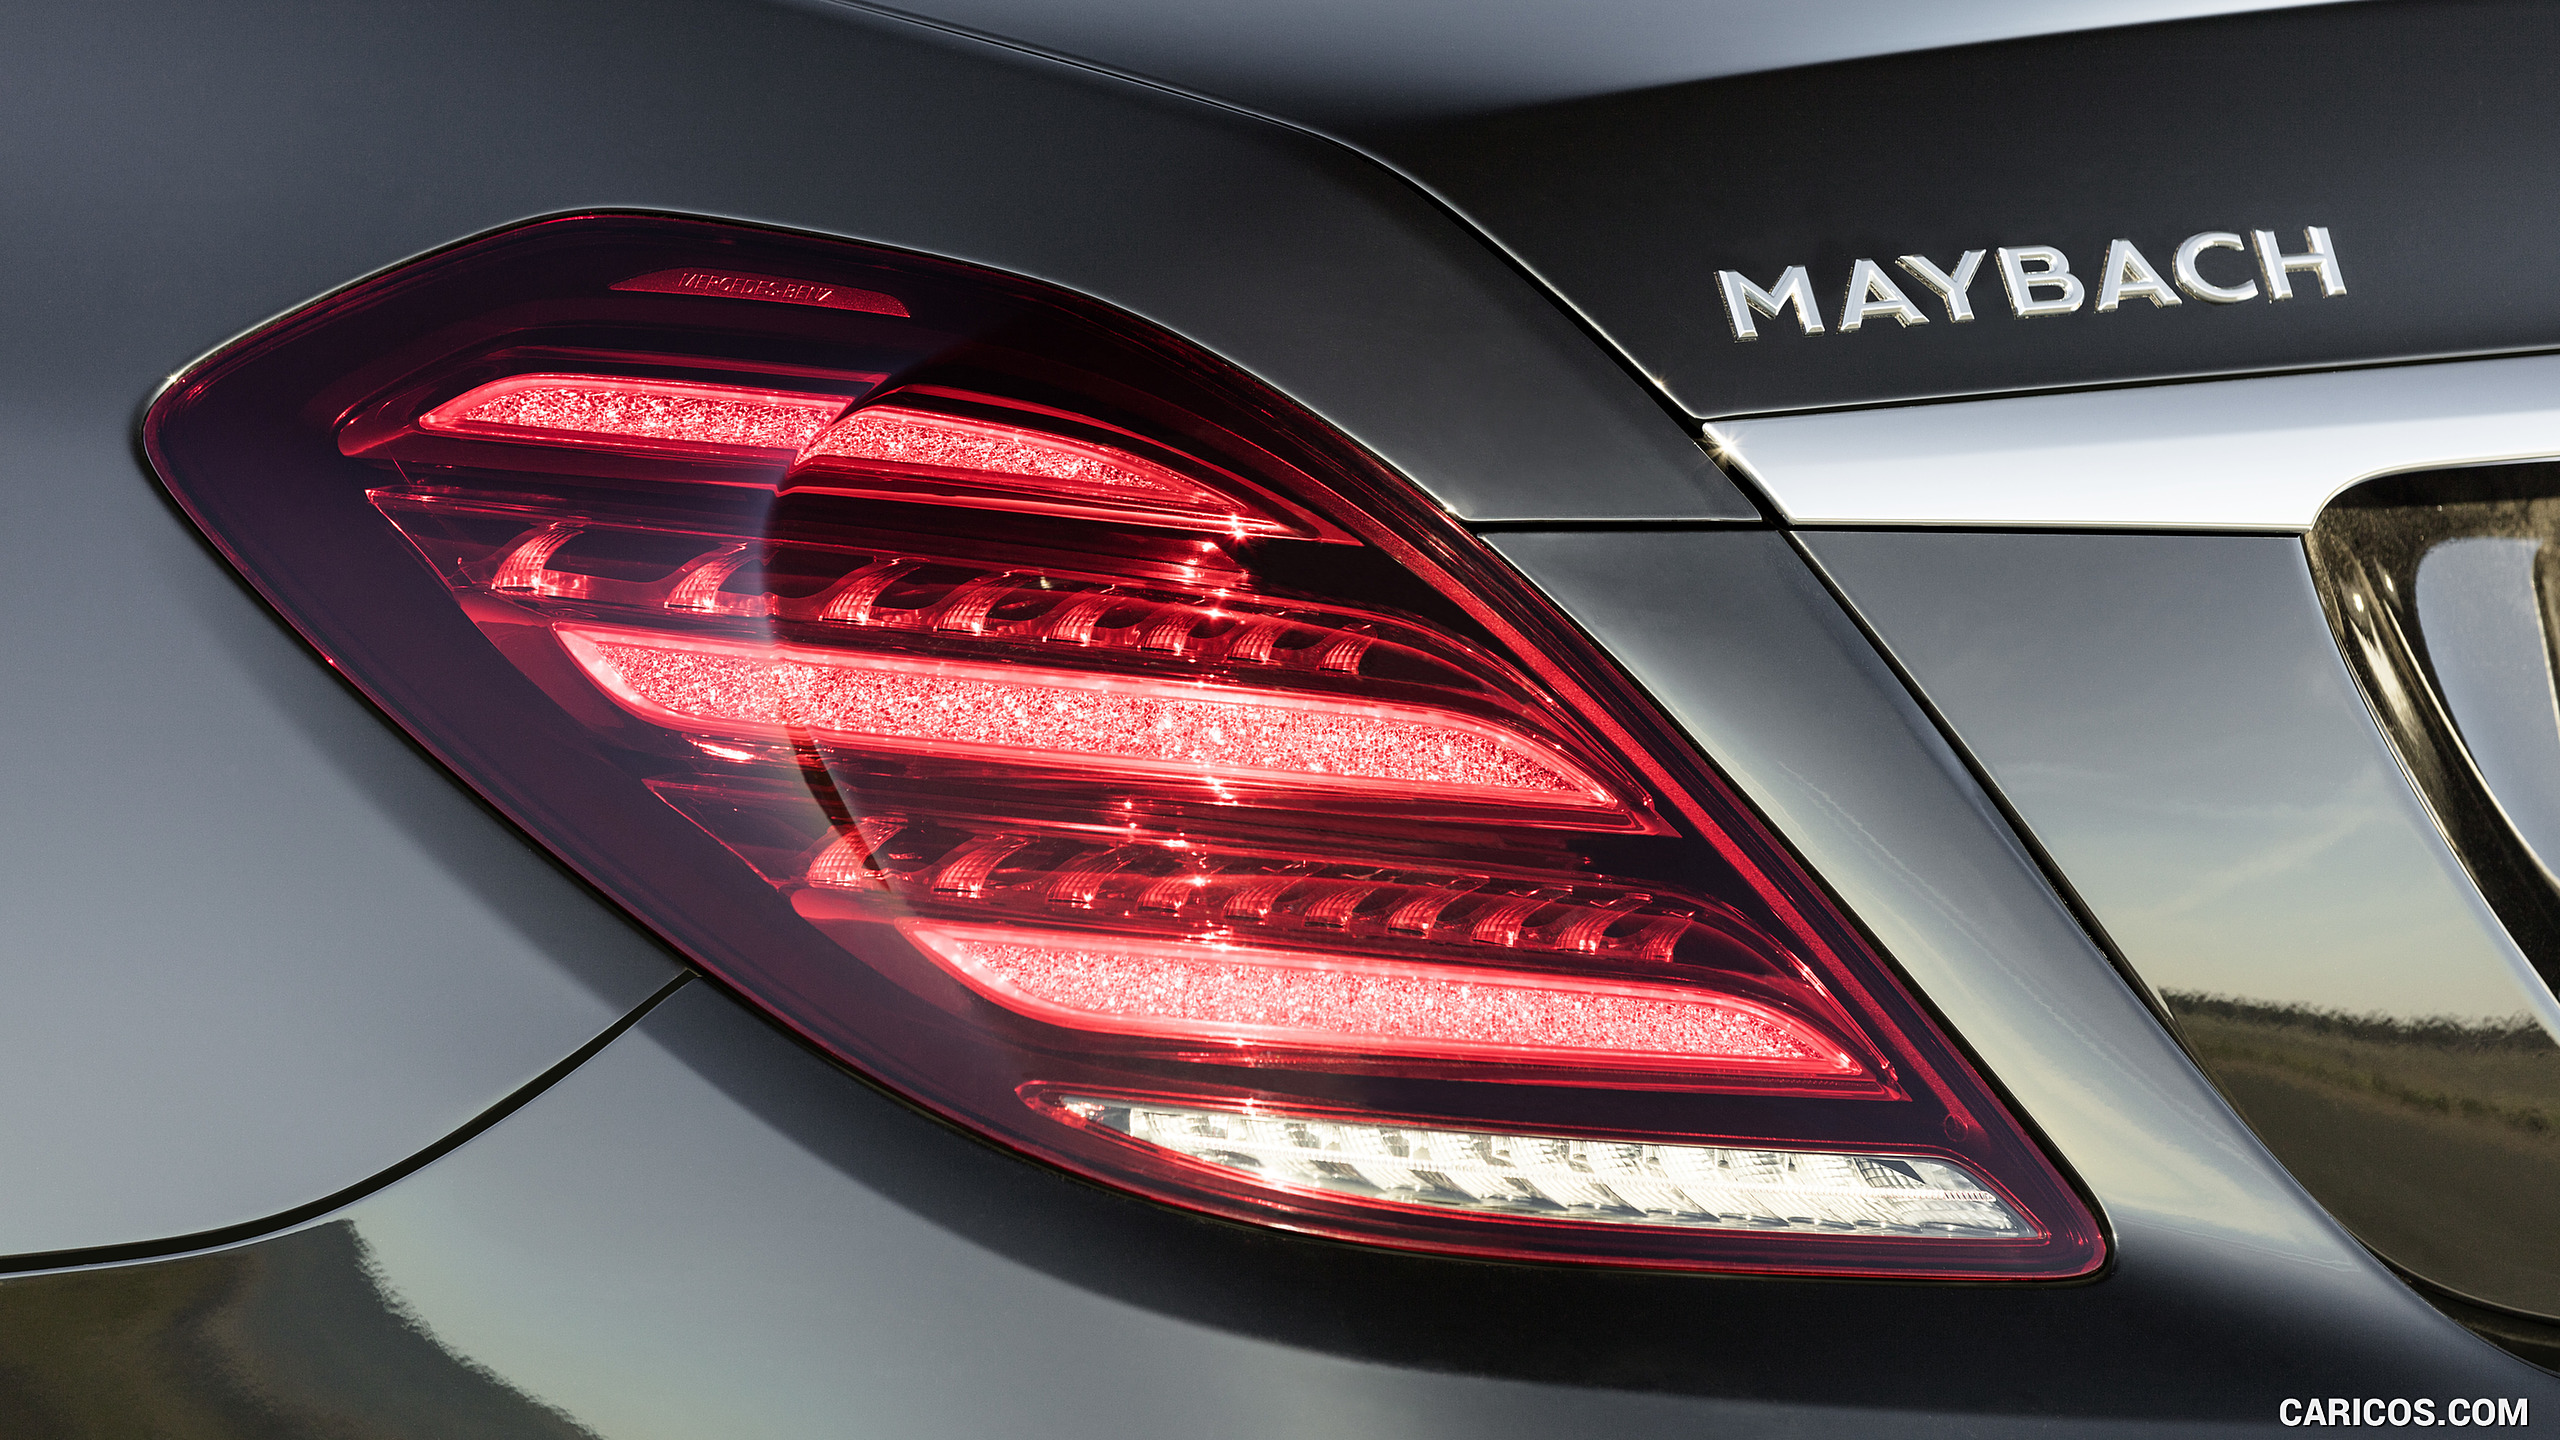 2018 Mercedes-Maybach S560 S-Class 4MATIC - Tail Light, #11 of 63